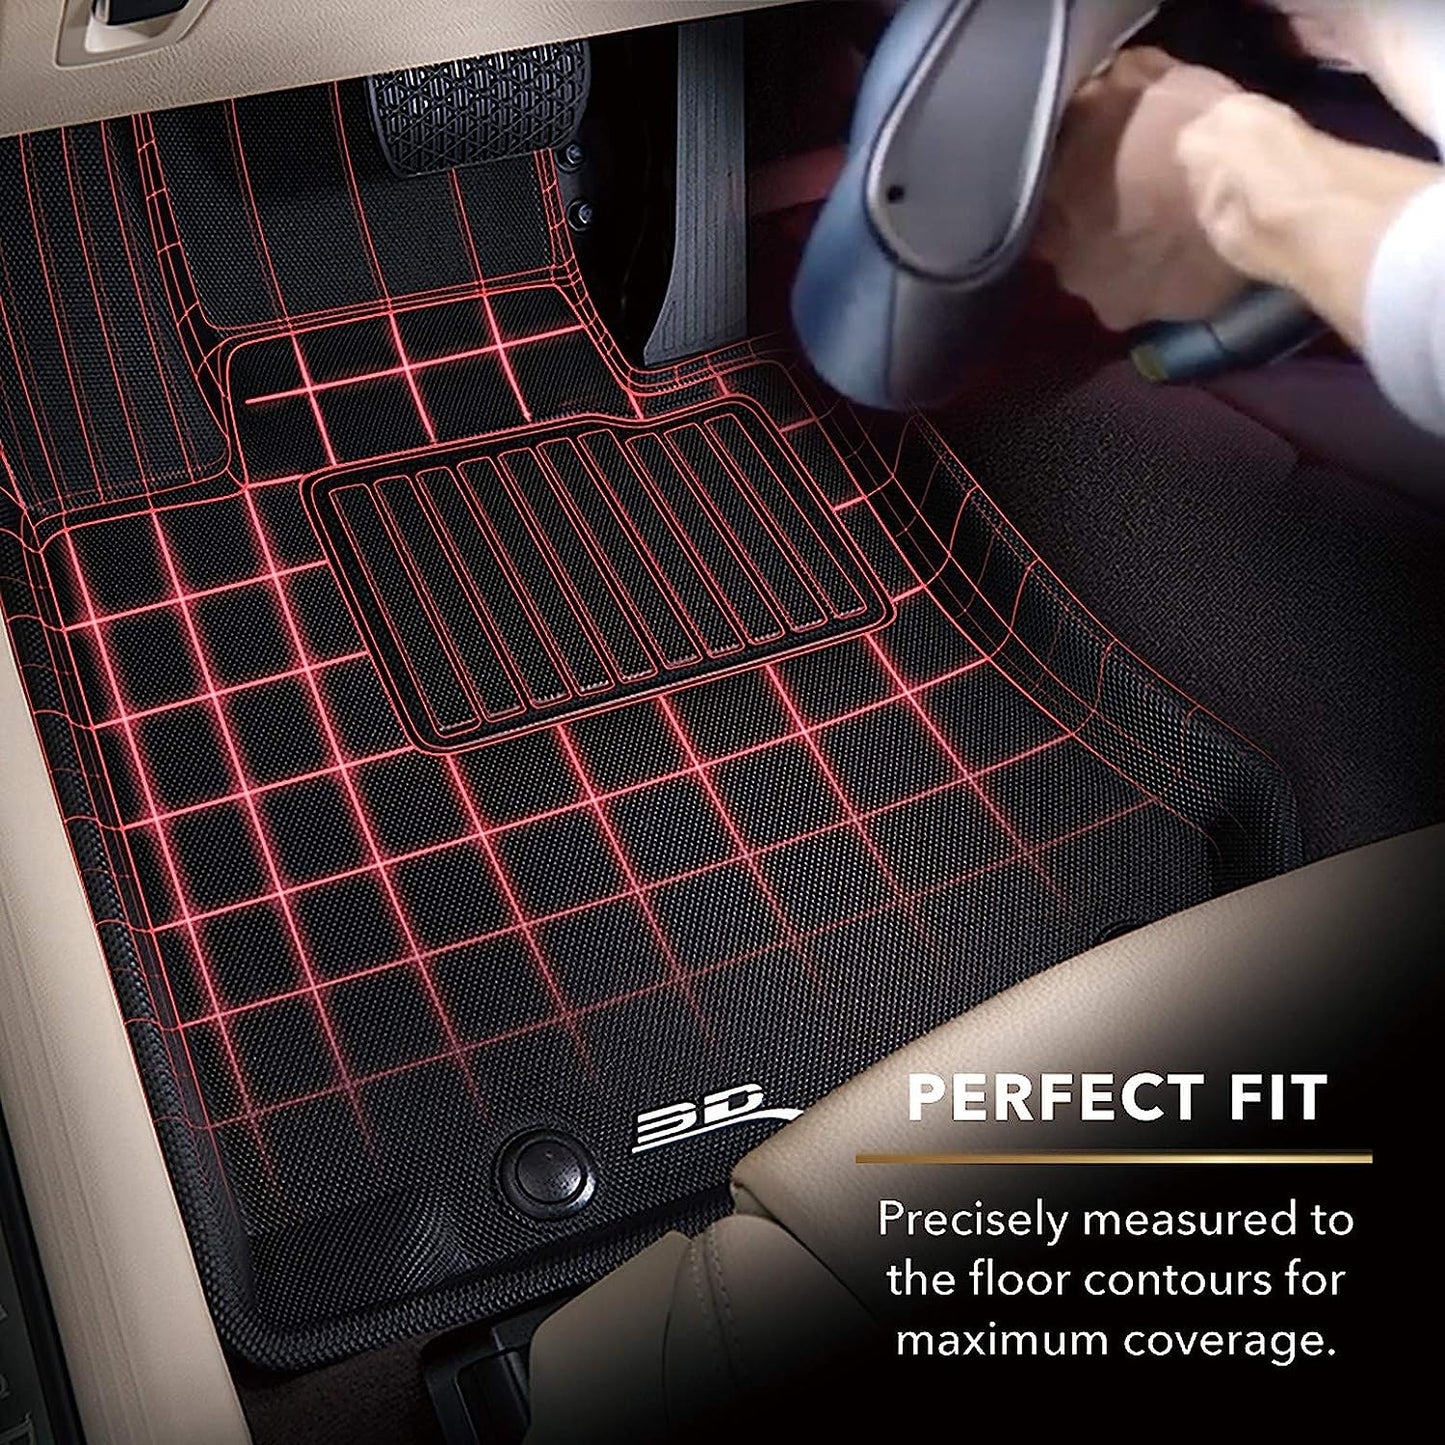 3D MAXpider Custom Fit Floor Liner Black for 2009-2019 FORD FLEX With 2nd Row Center Console, 1st and 2nd Rows Only